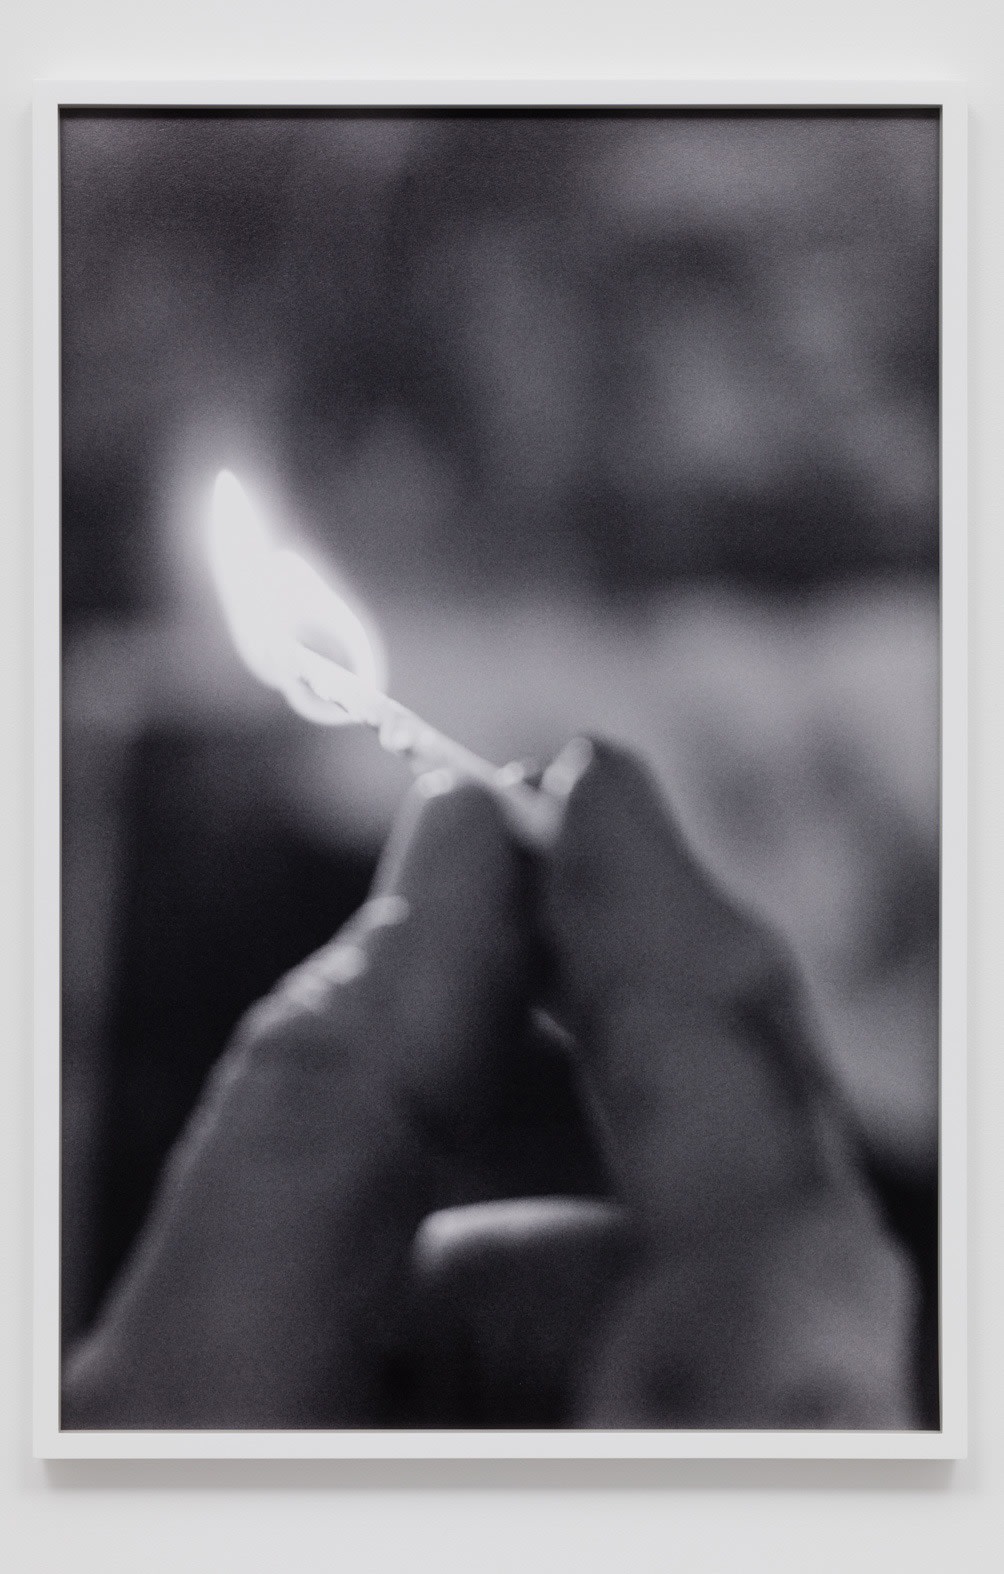 CATHERINE OPIE, Match fire #2 (The Modernist), 2016